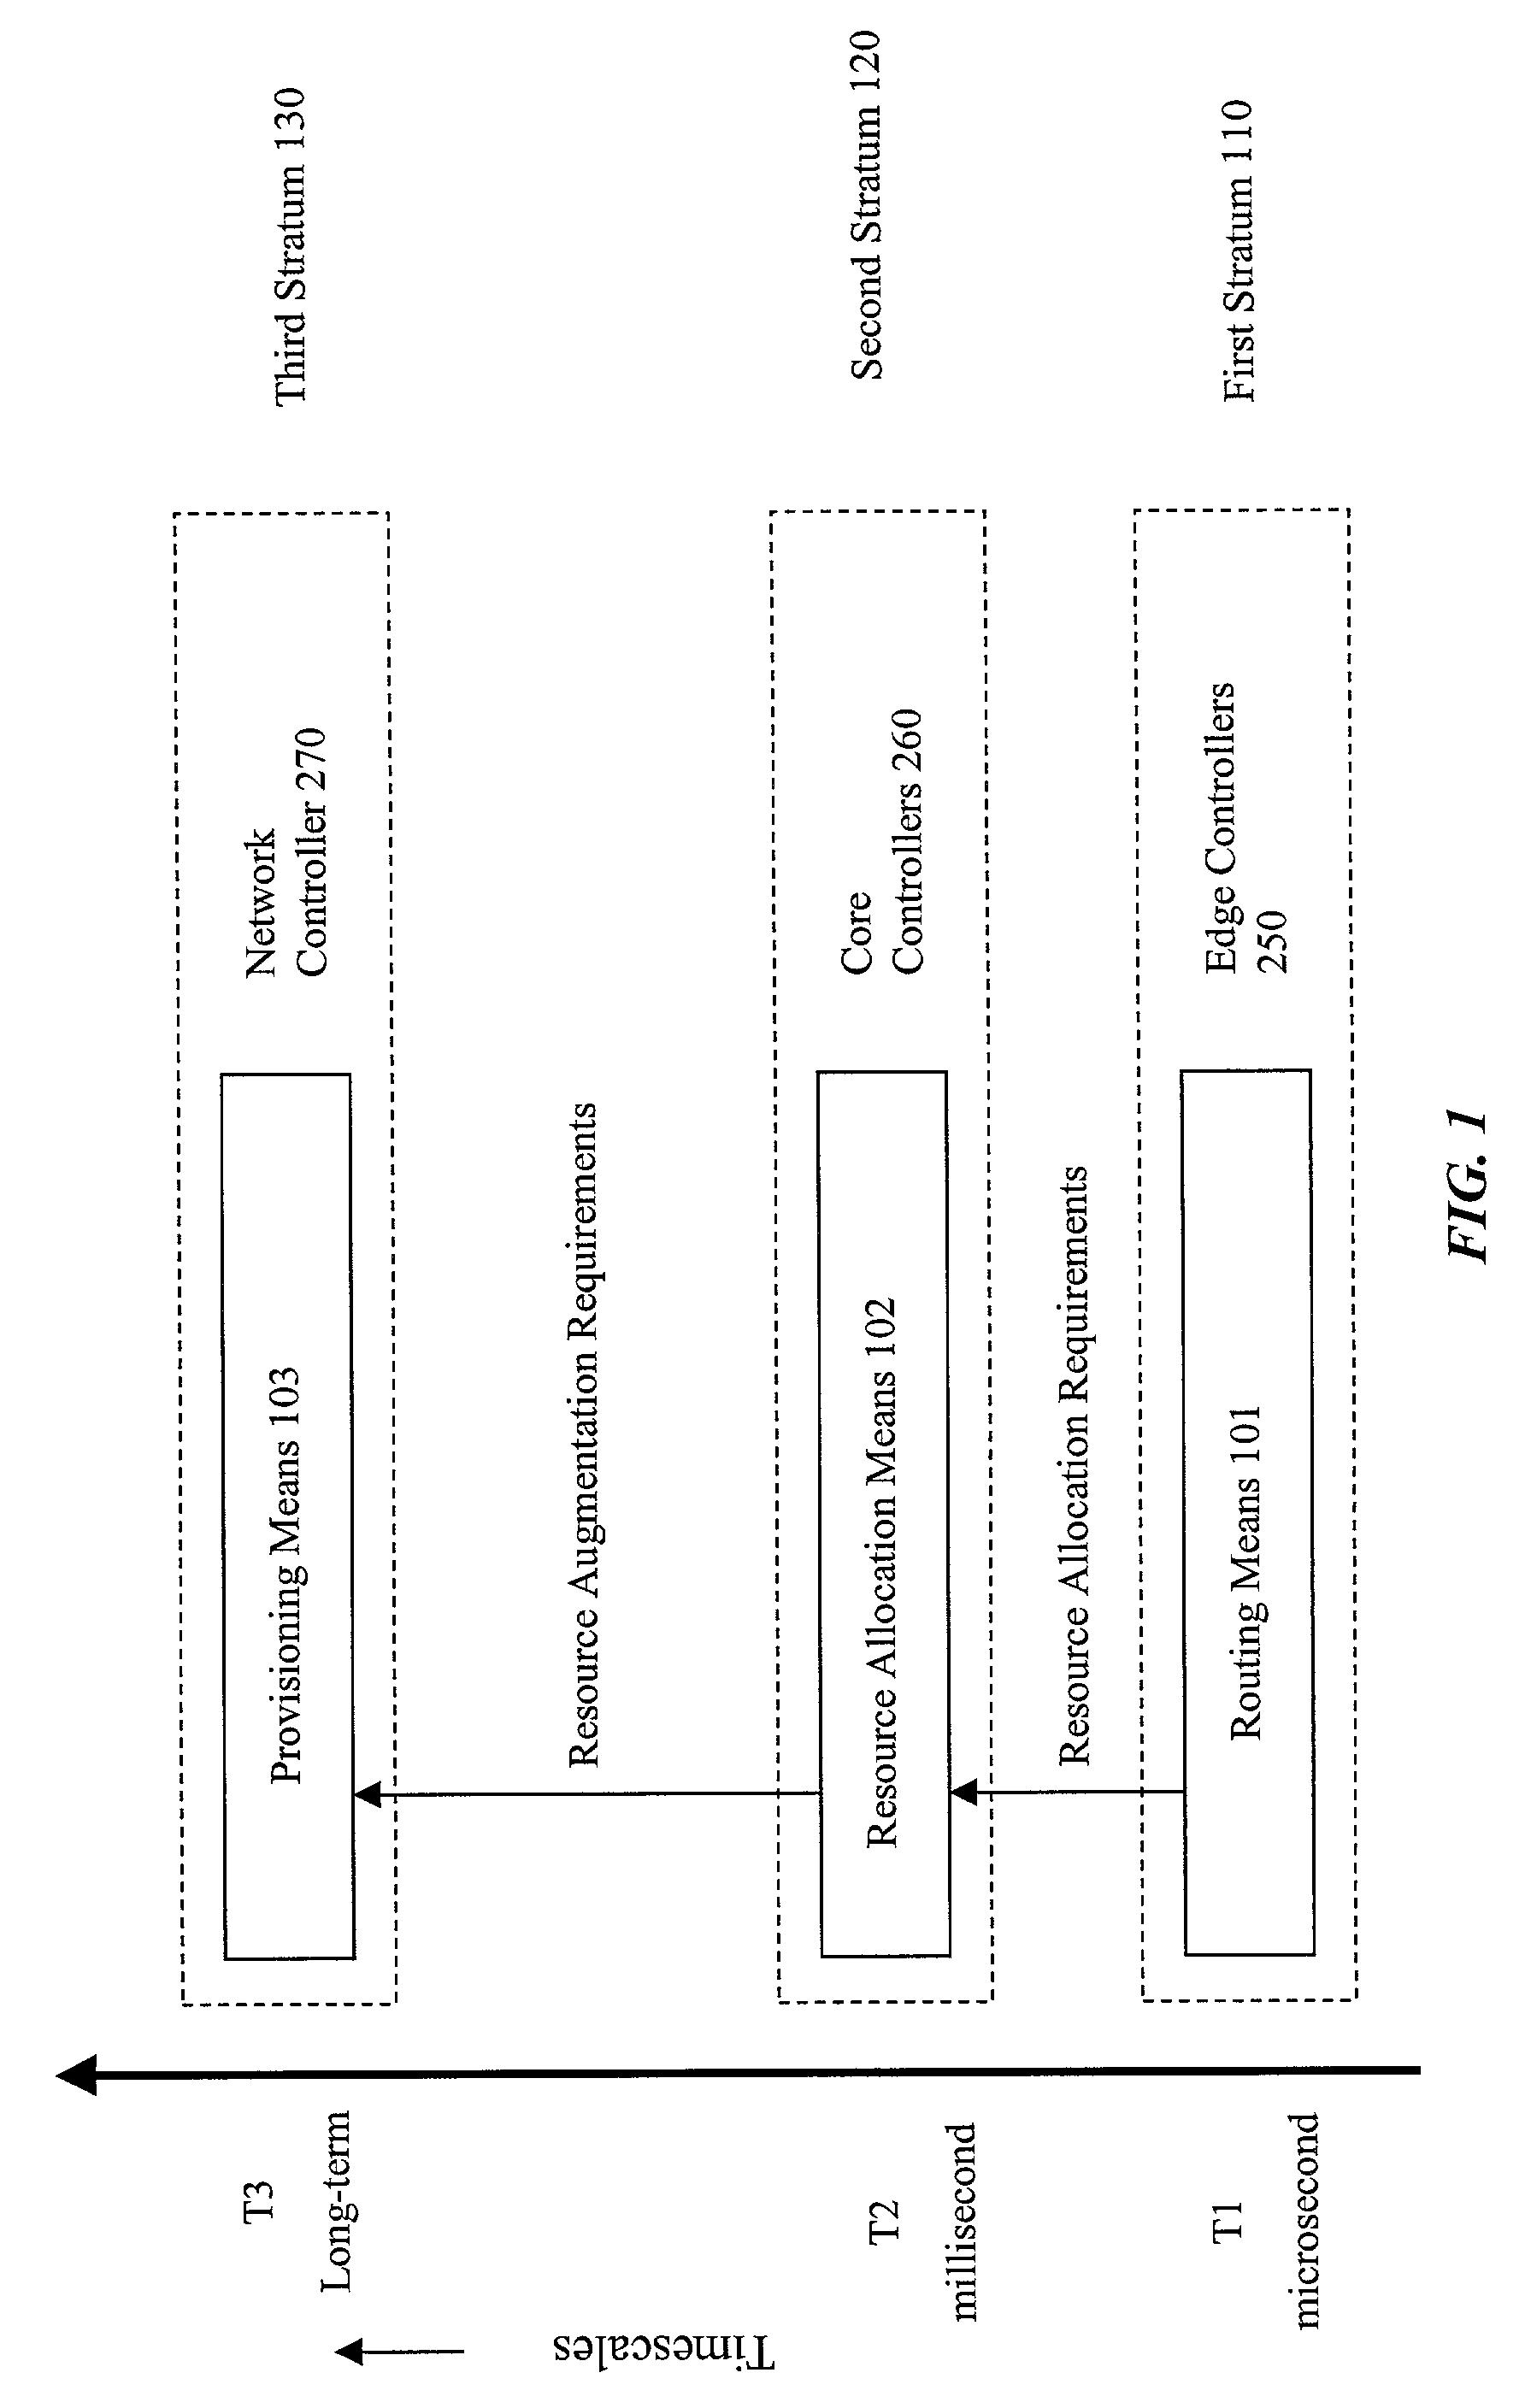 System and method for network control and provisioning